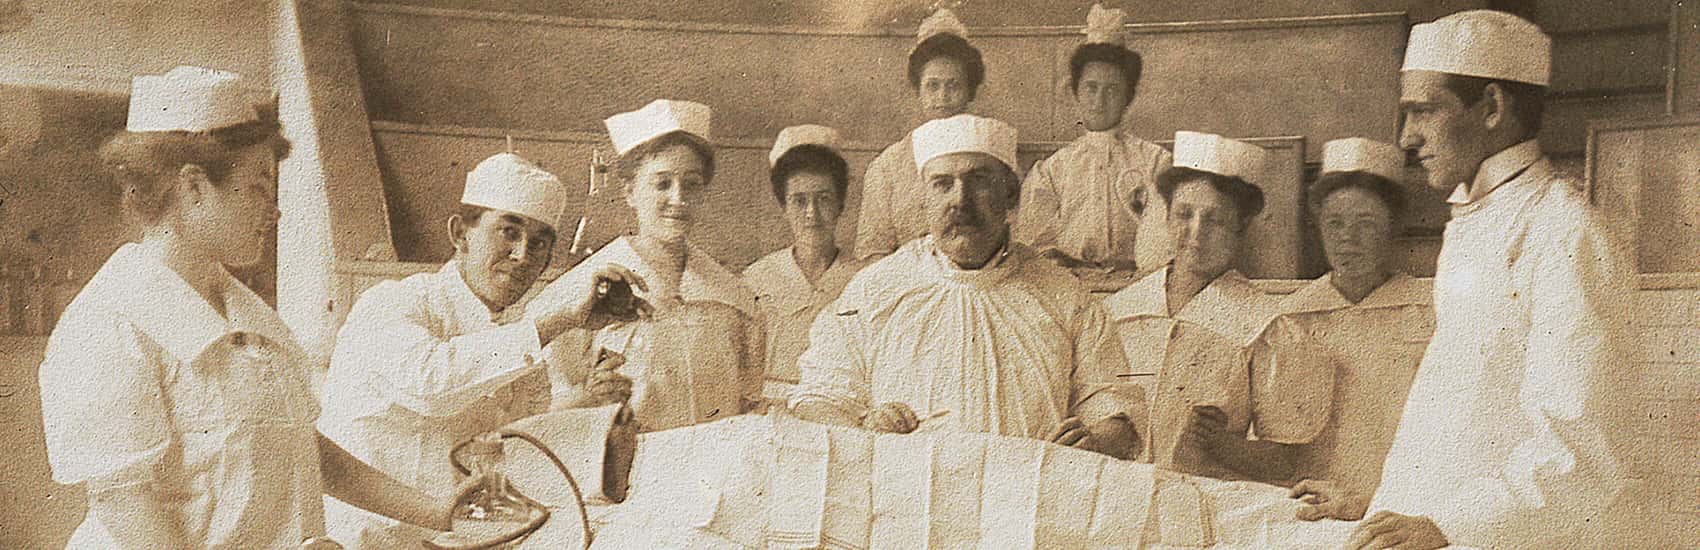 Historical photo of doctors and nurses standing around patient in surgical theater